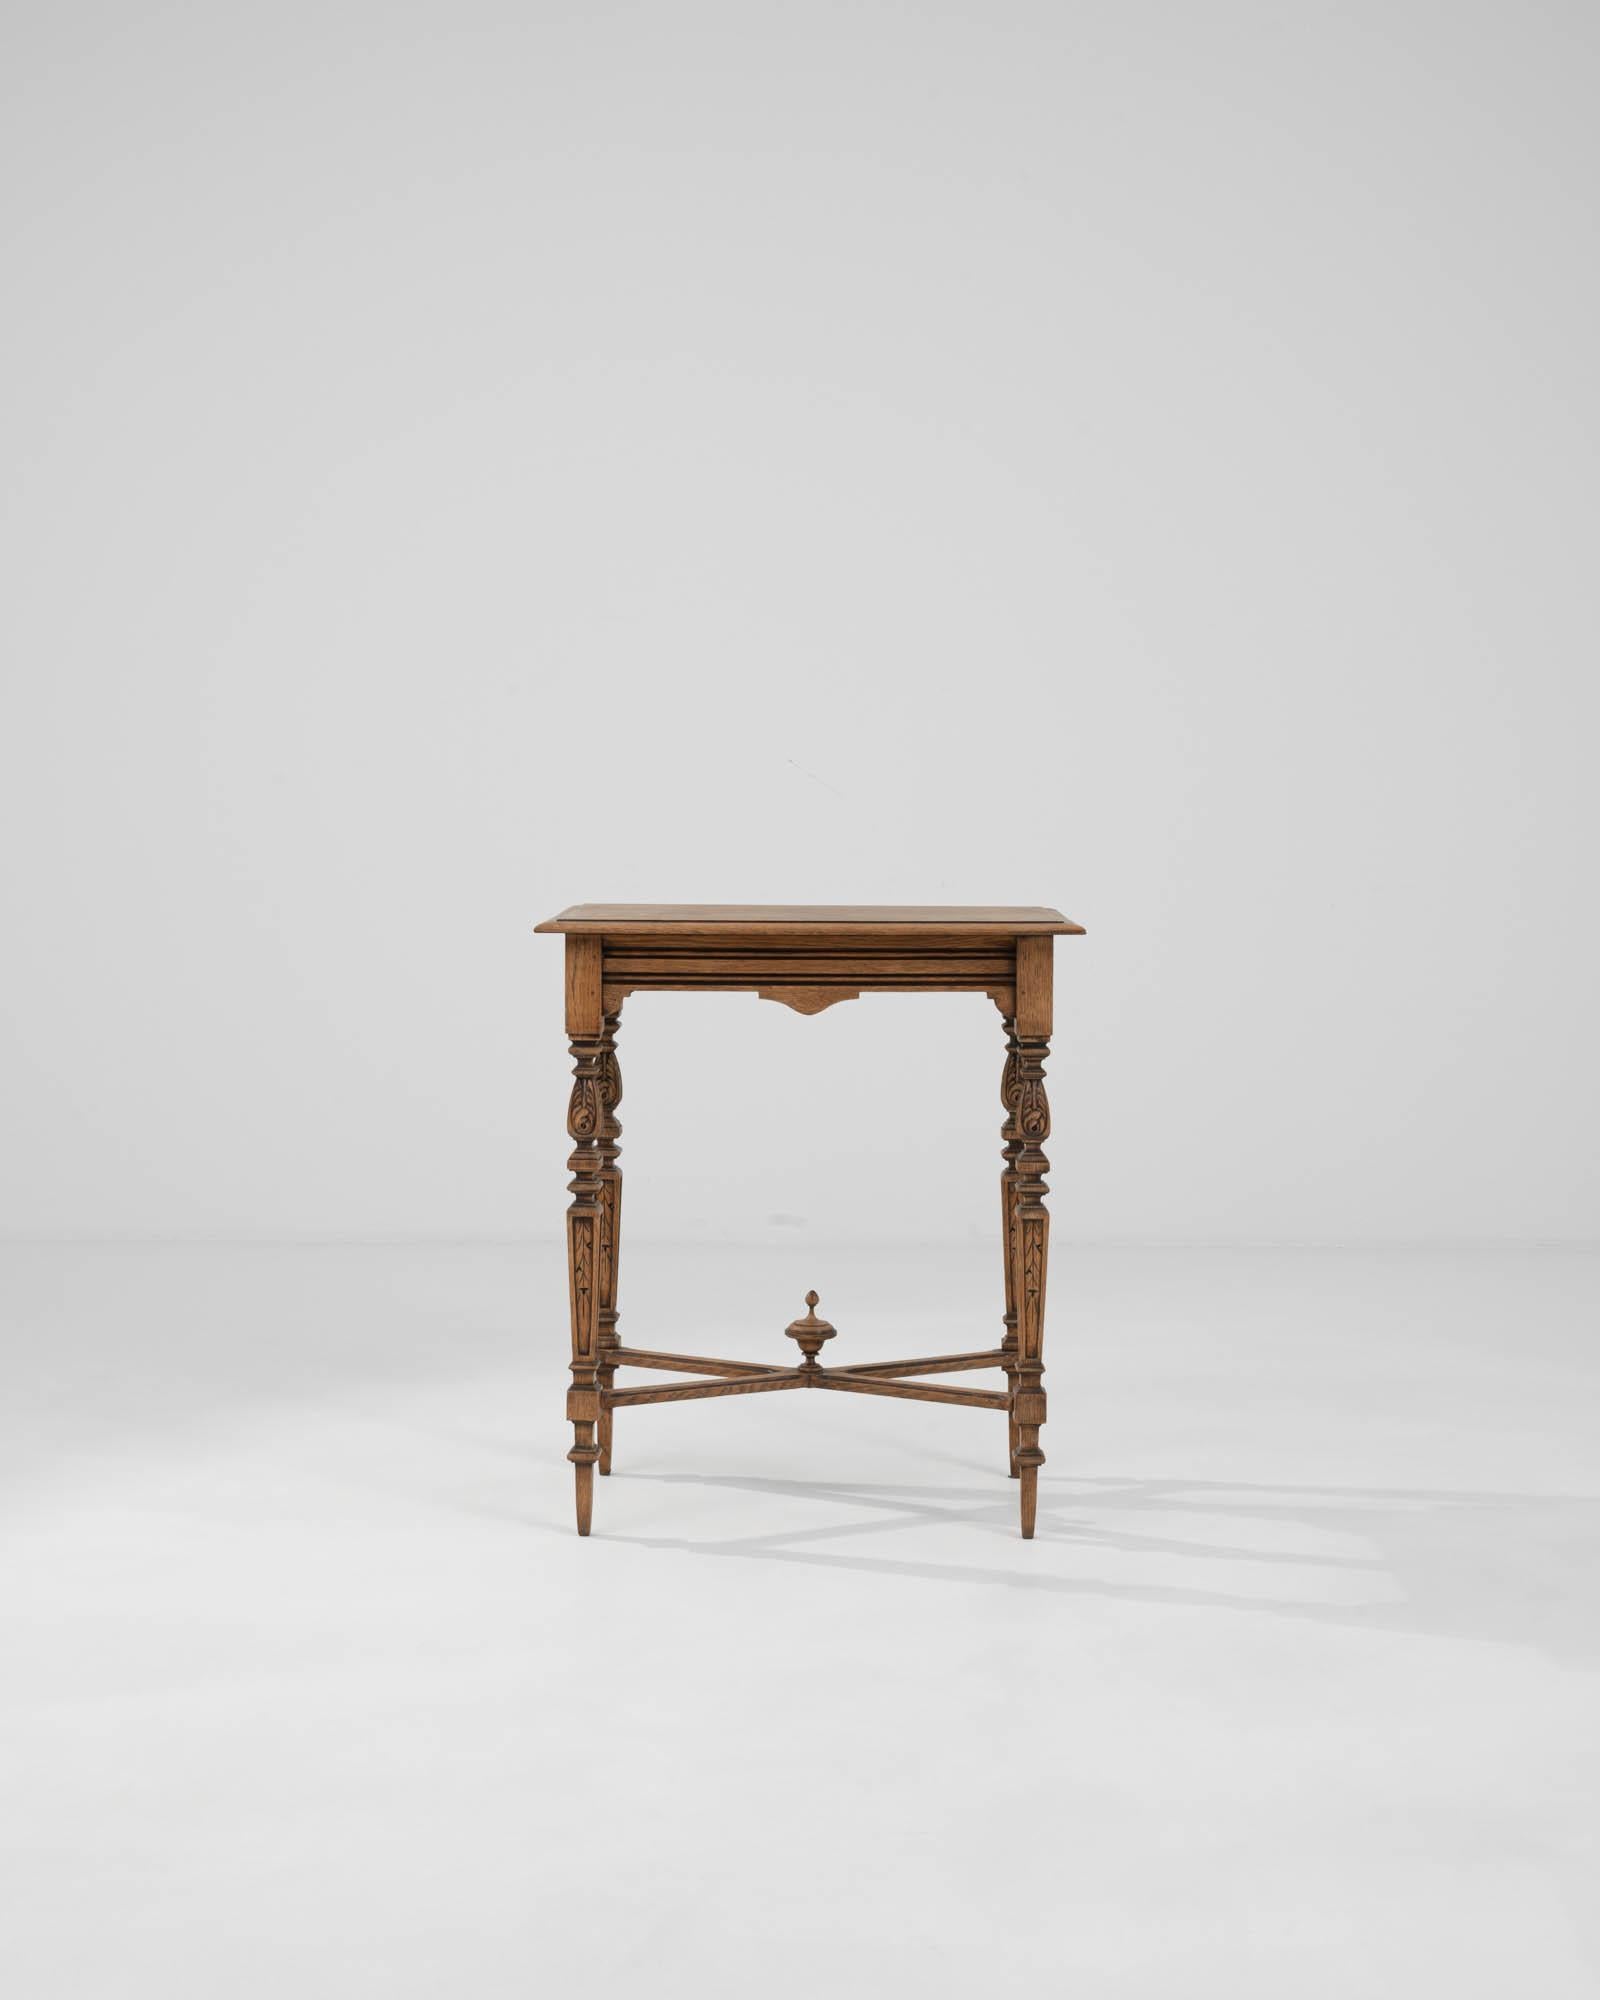 Step back in time with this exquisite Early 20th Century French Wooden Side Table, a classic piece that exudes the grace and charm of a bygone era. Crafted with meticulous attention to detail, this side table showcases masterful carvings, from the